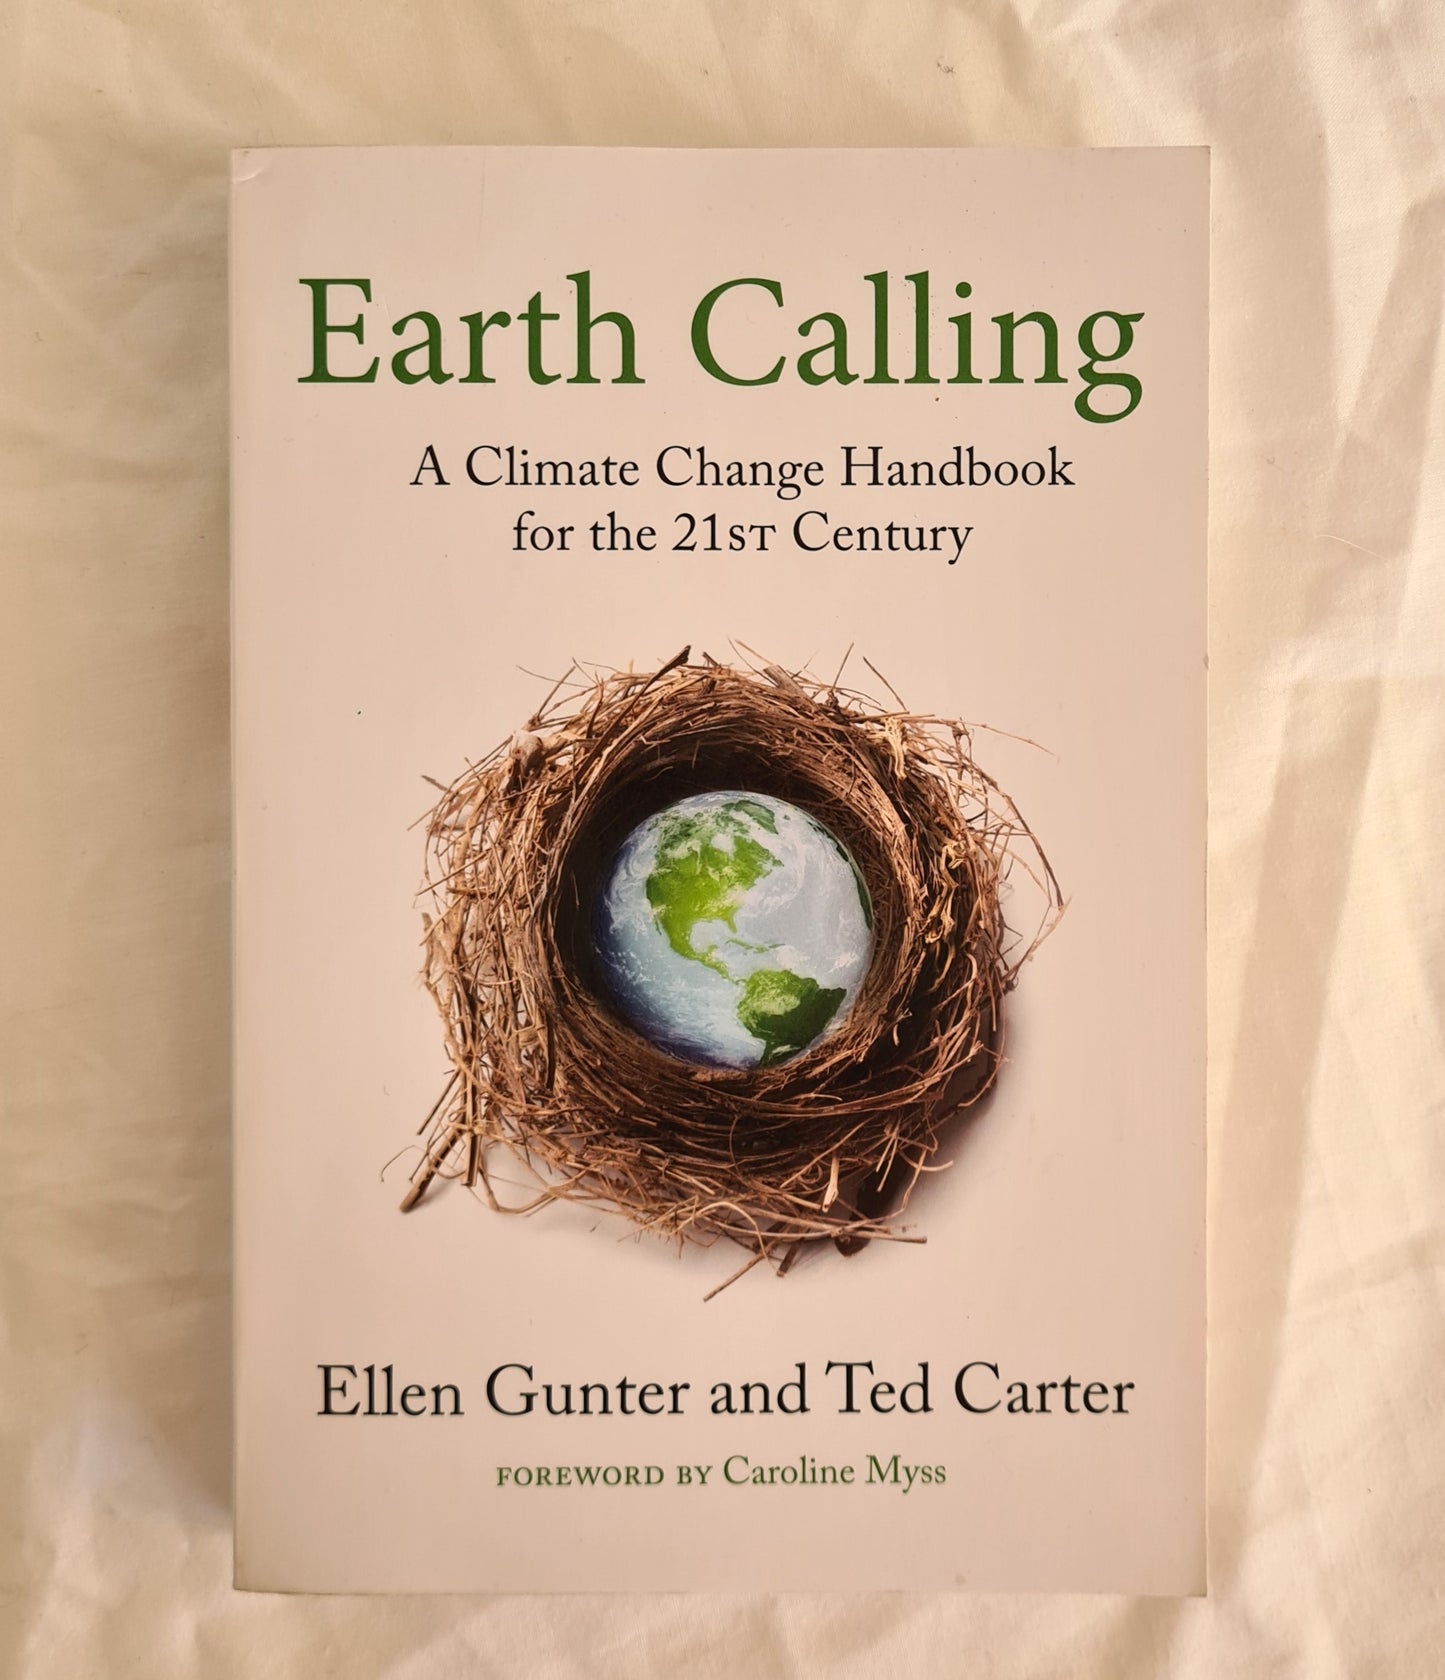 Earth Calling  A Climate Change Handbook for the 21st Century  by Ellen Gunter and Ted Carter